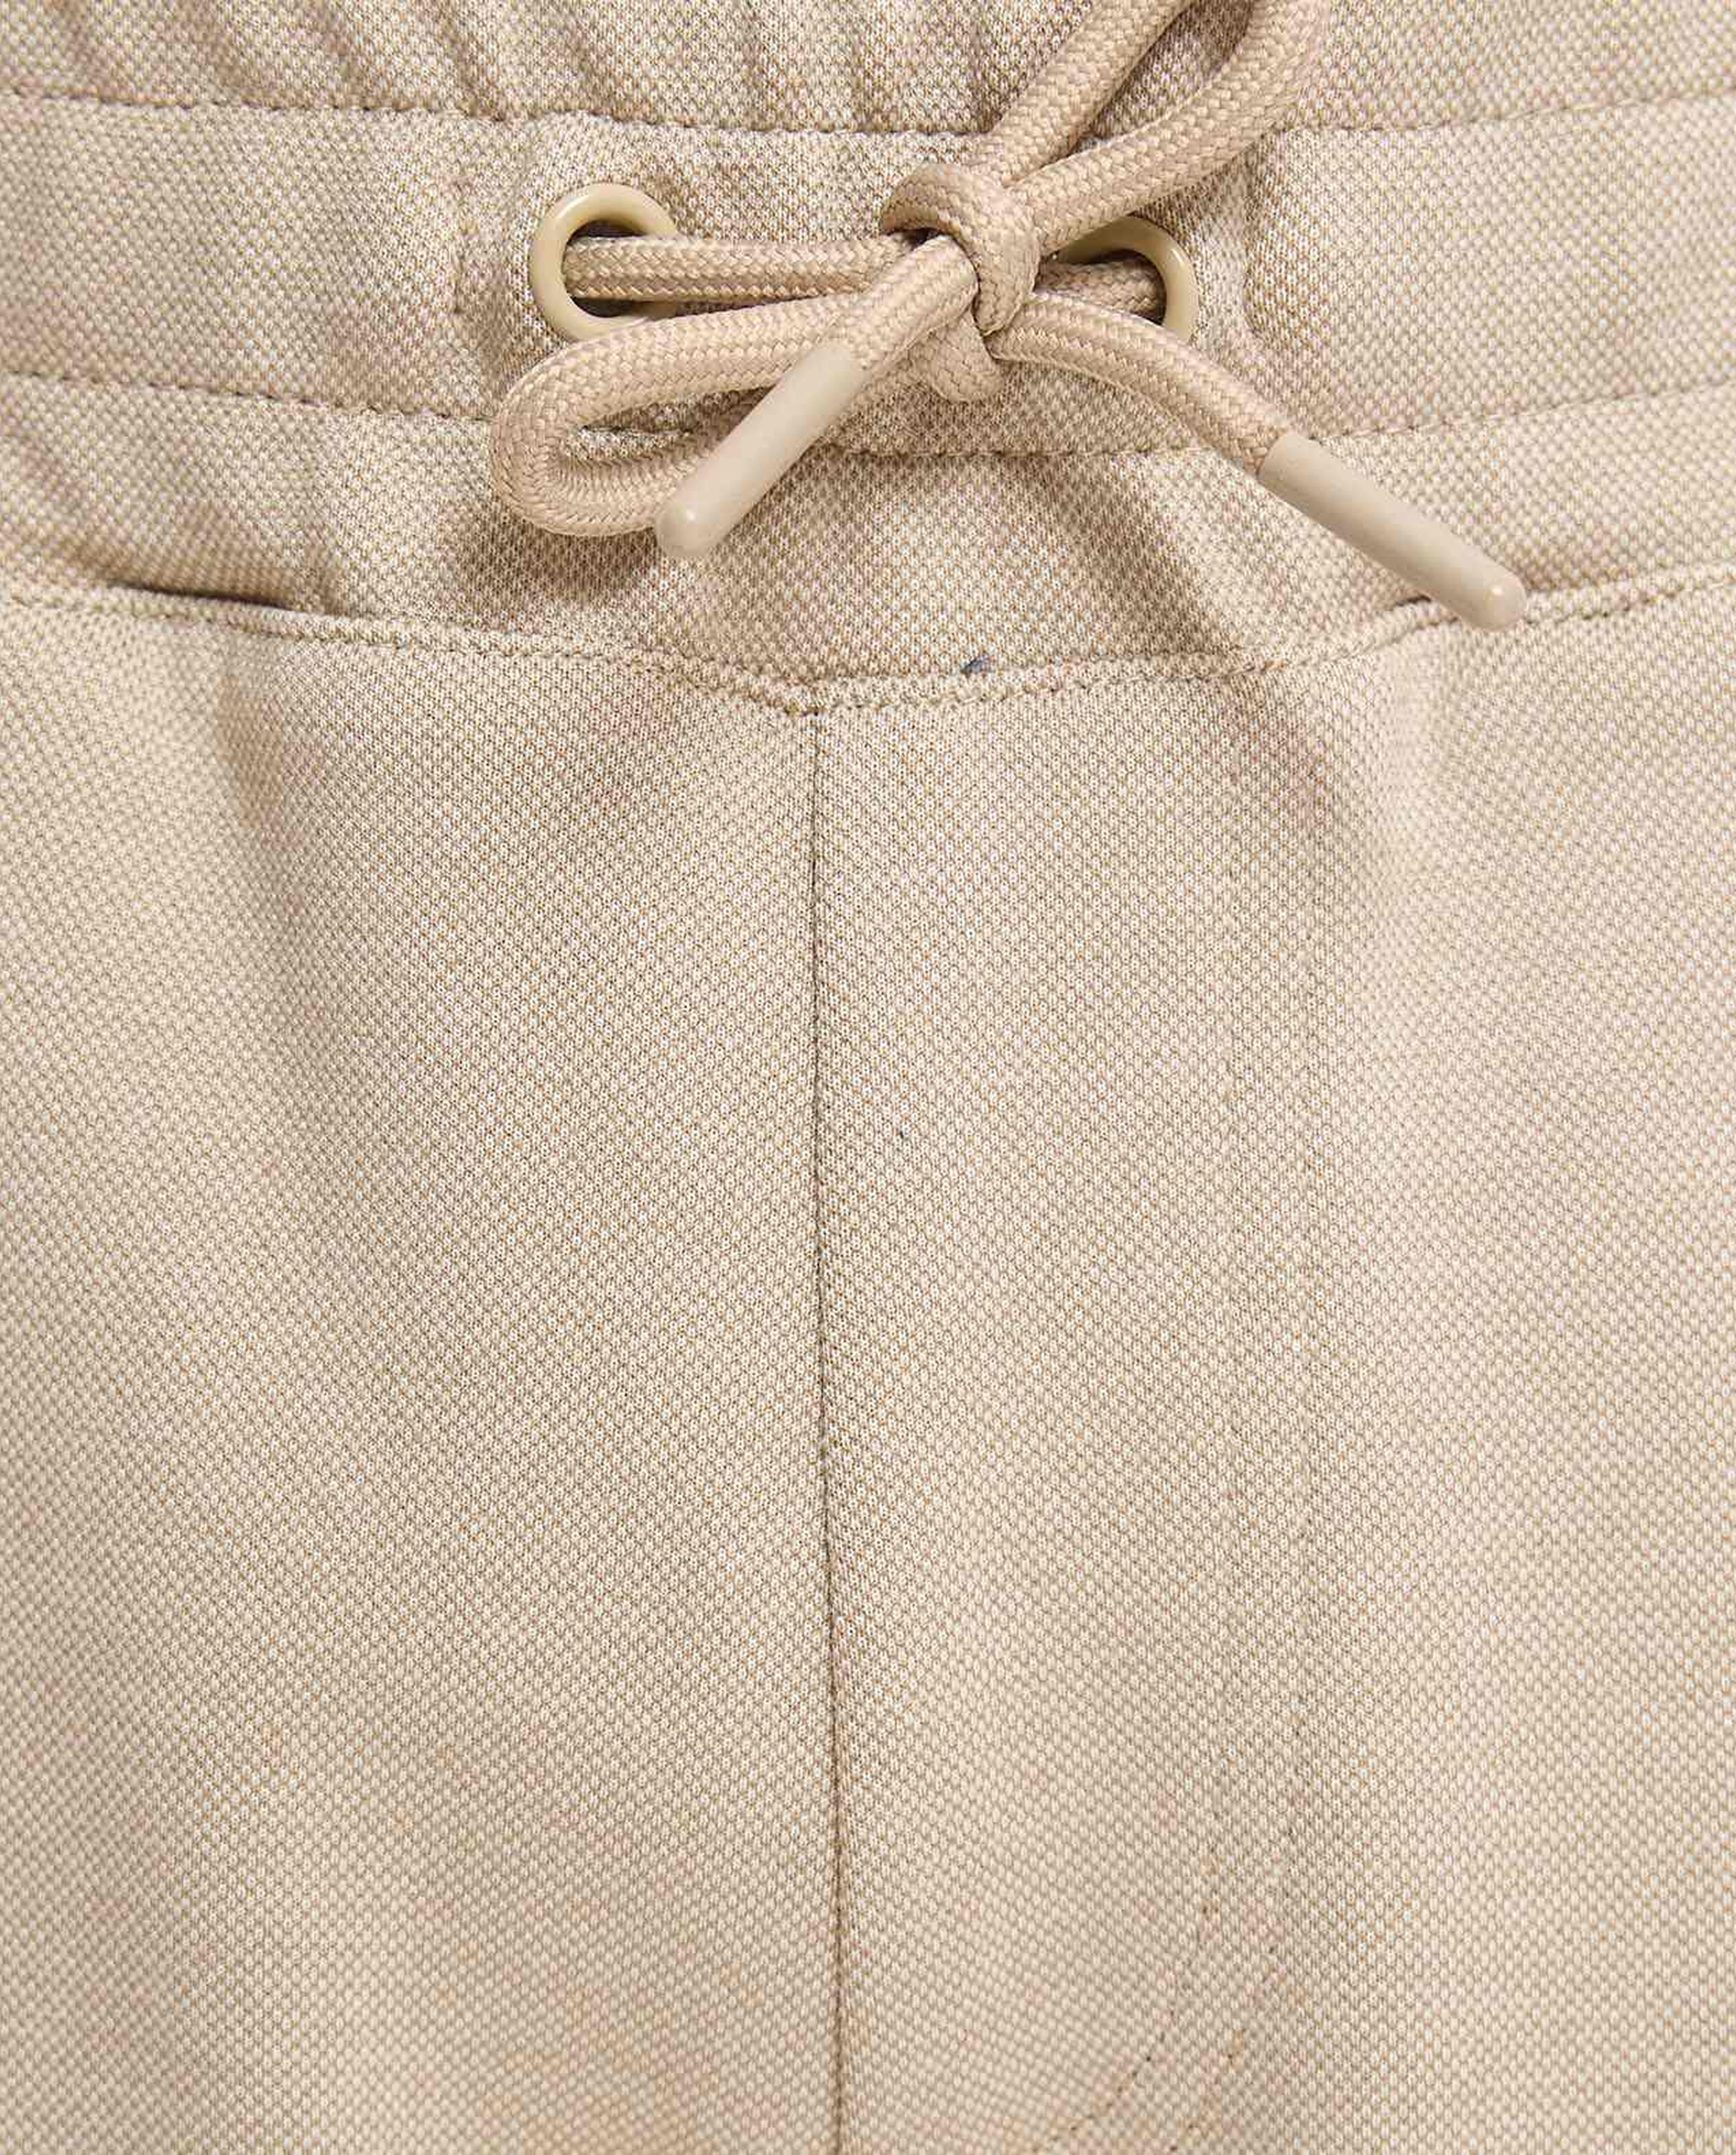 Solid Knit Pants with Drawstring Waist